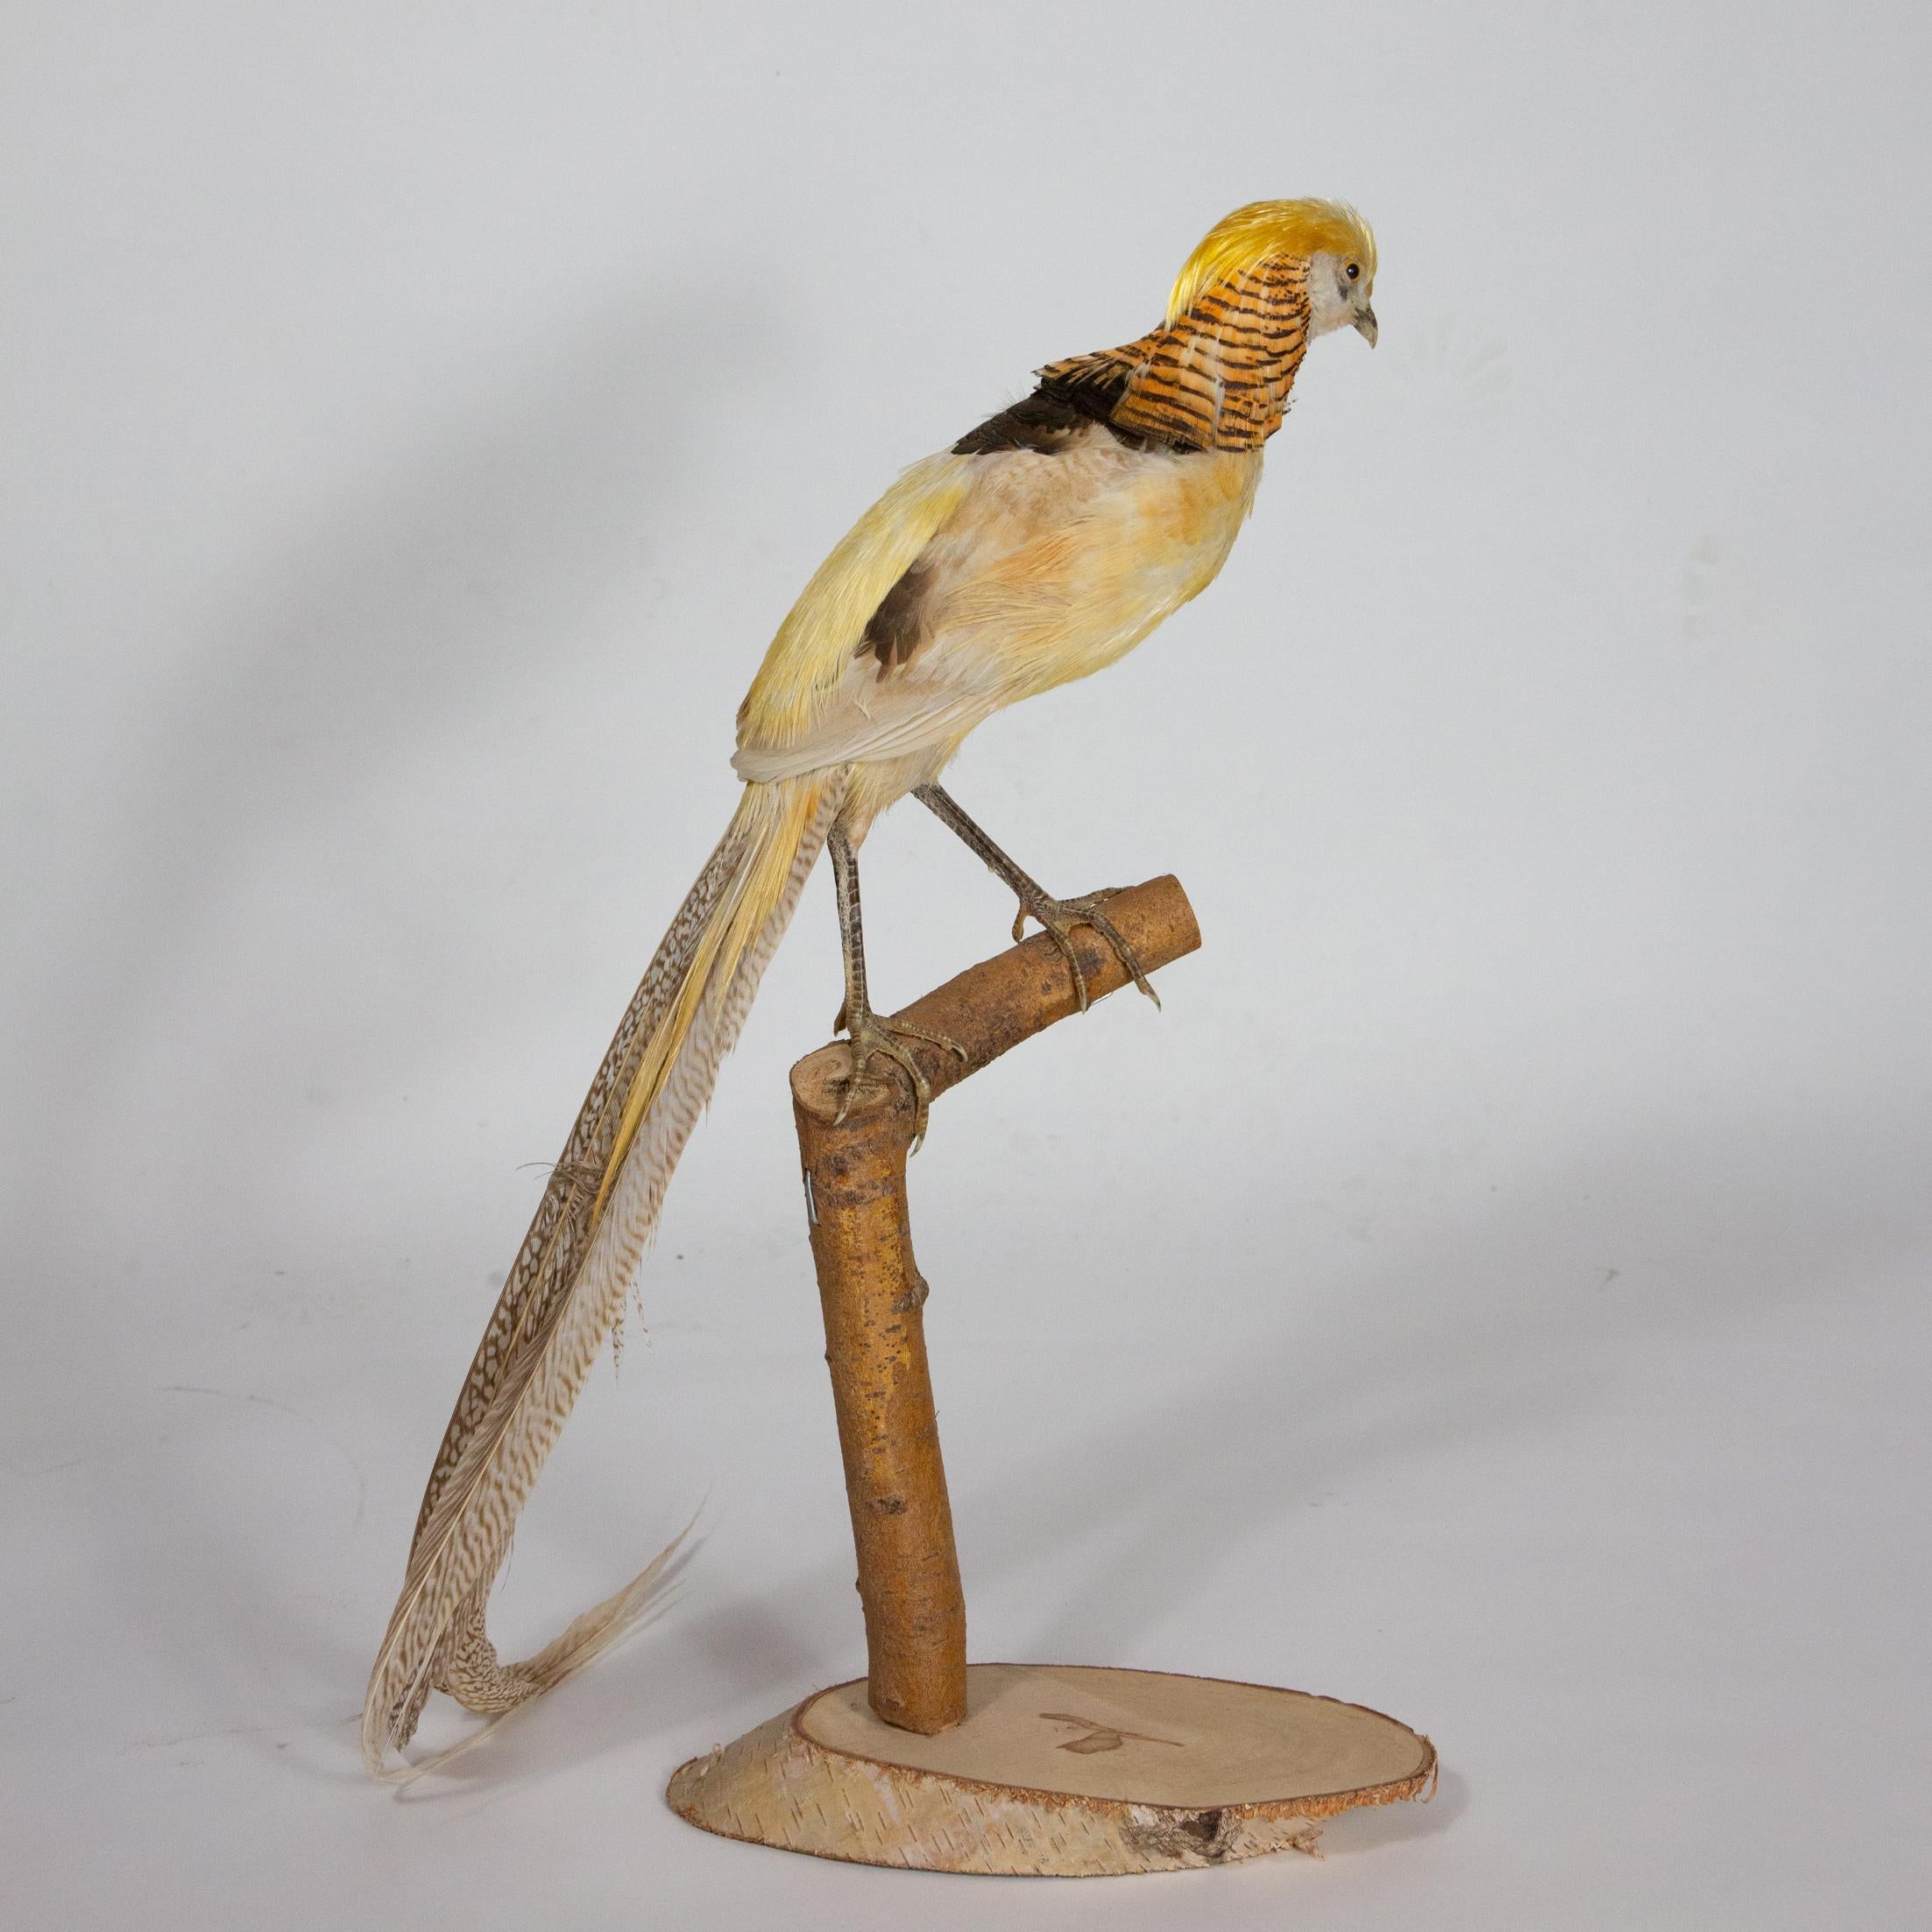 This taxidermy Yellow Golden Pheasant is a beautiful representation of the female of the species, showcasing its vibrant colors and distinctive markings. The Yellow Golden Pheasant is a game bird native to China, known for its striking appearance